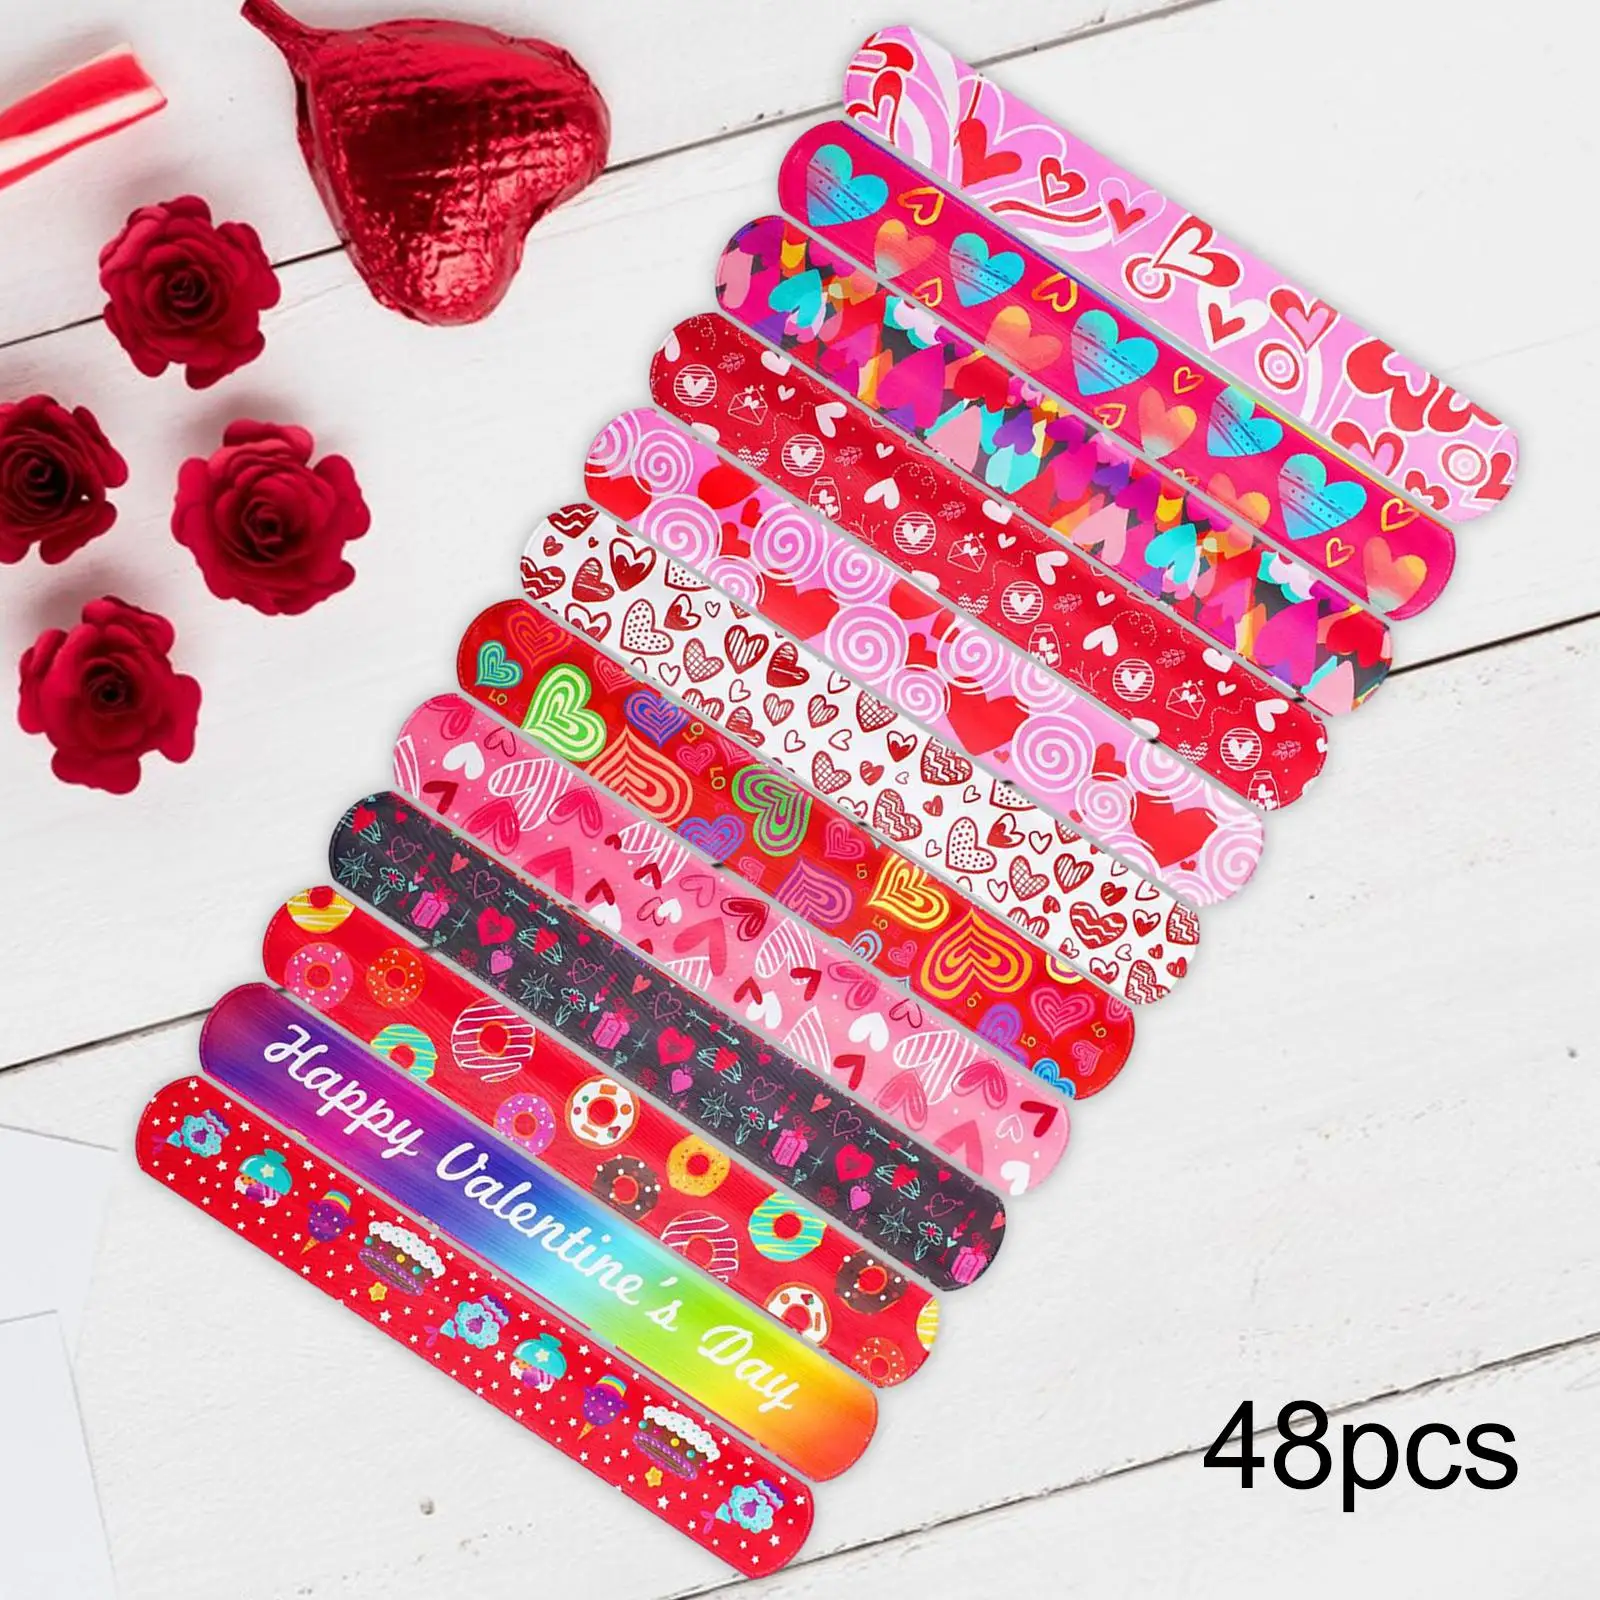 48 Pieces Valentine`s Day Slap Bracelets Toy Colorful Heart Design Gift Exchange Wrap Around Toy Slap Band for Boys Kids Adults